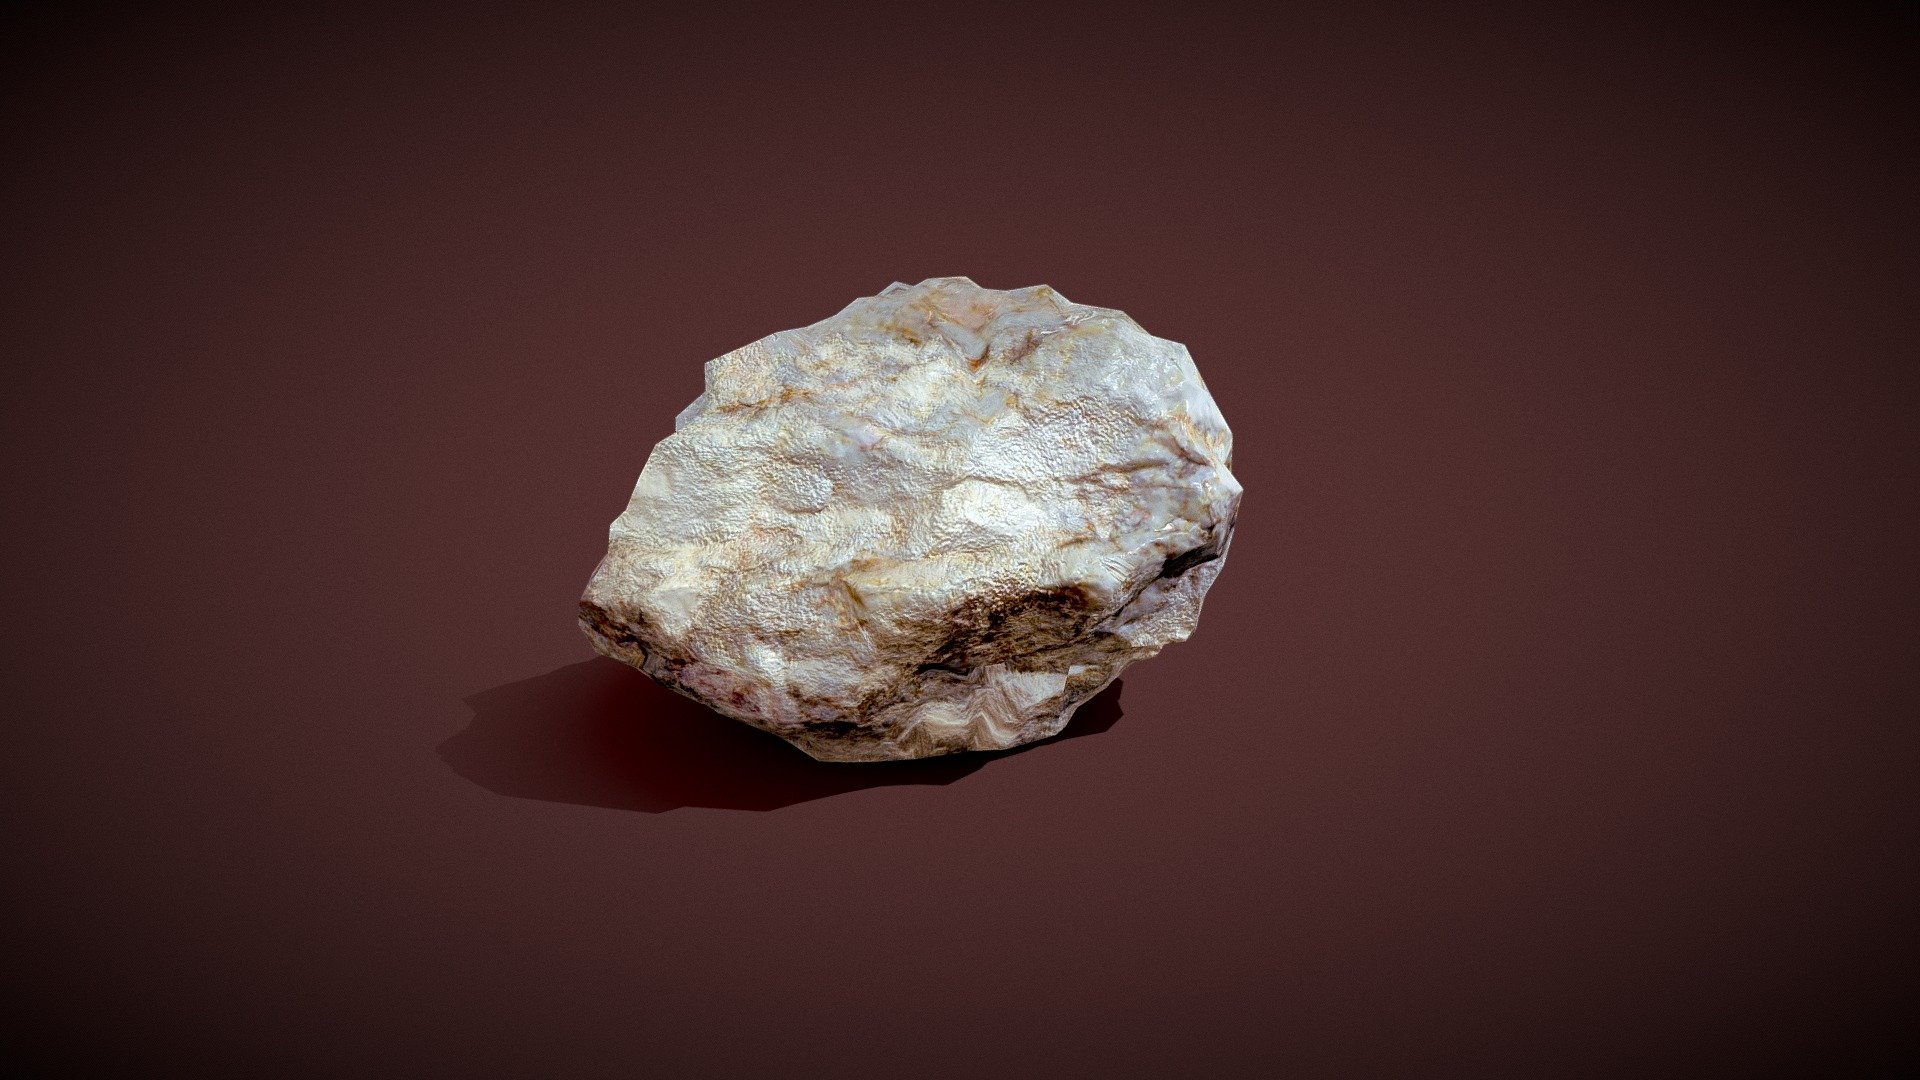 A high poly mesh of a rock was originally created with photogrammetry software and was provided to create the low poly mesh for the rock. The low poly wireframe was done in Maya. PBR materials for the rock model were created using Substance Painter. Normal, and Roughness maps were created  to create the rock textures 3d model